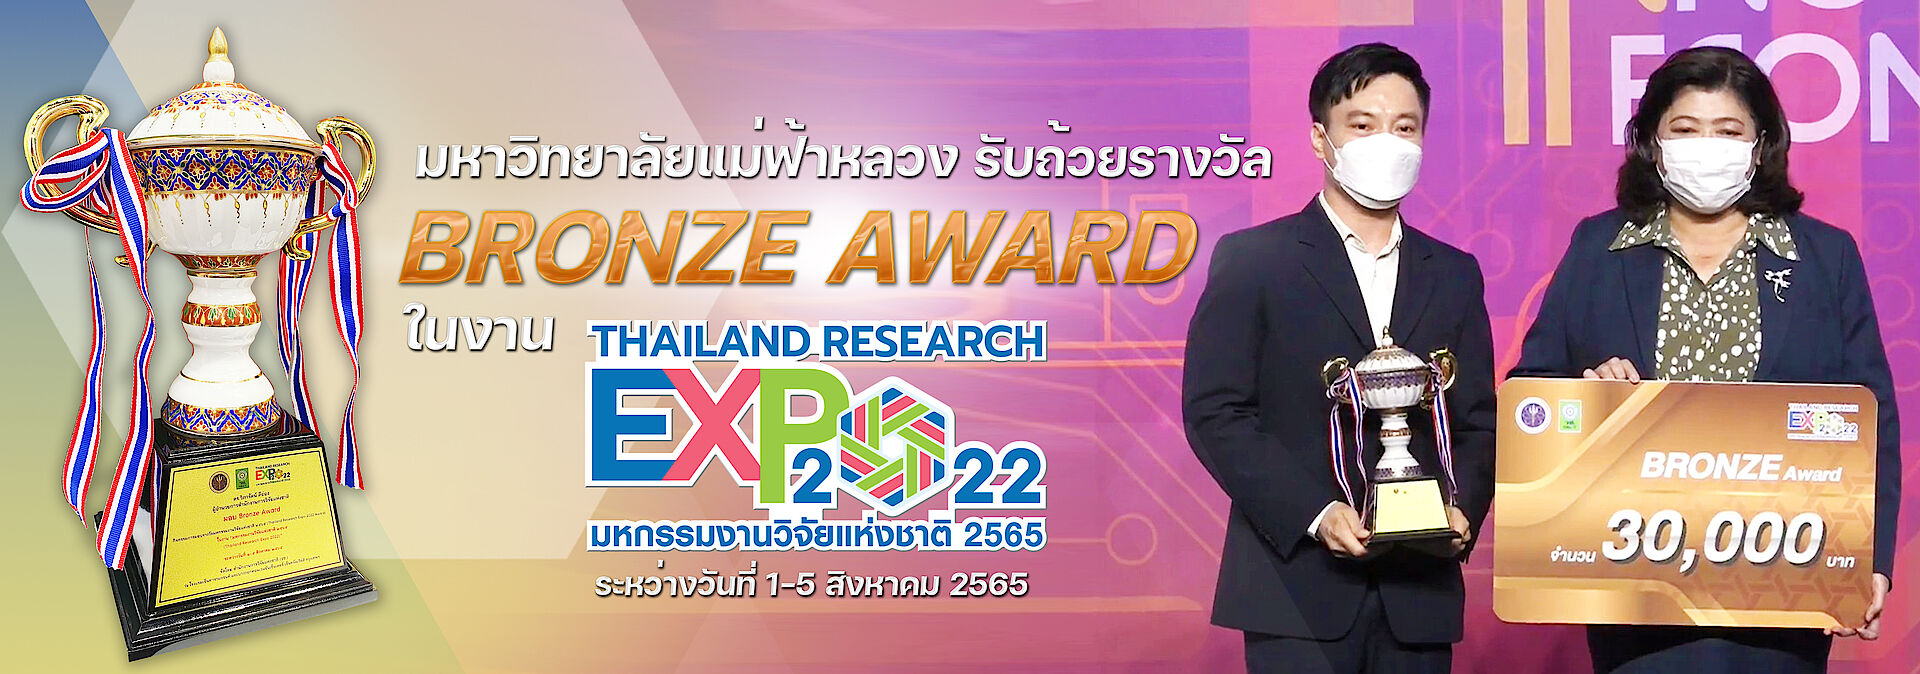 Research Expo2022